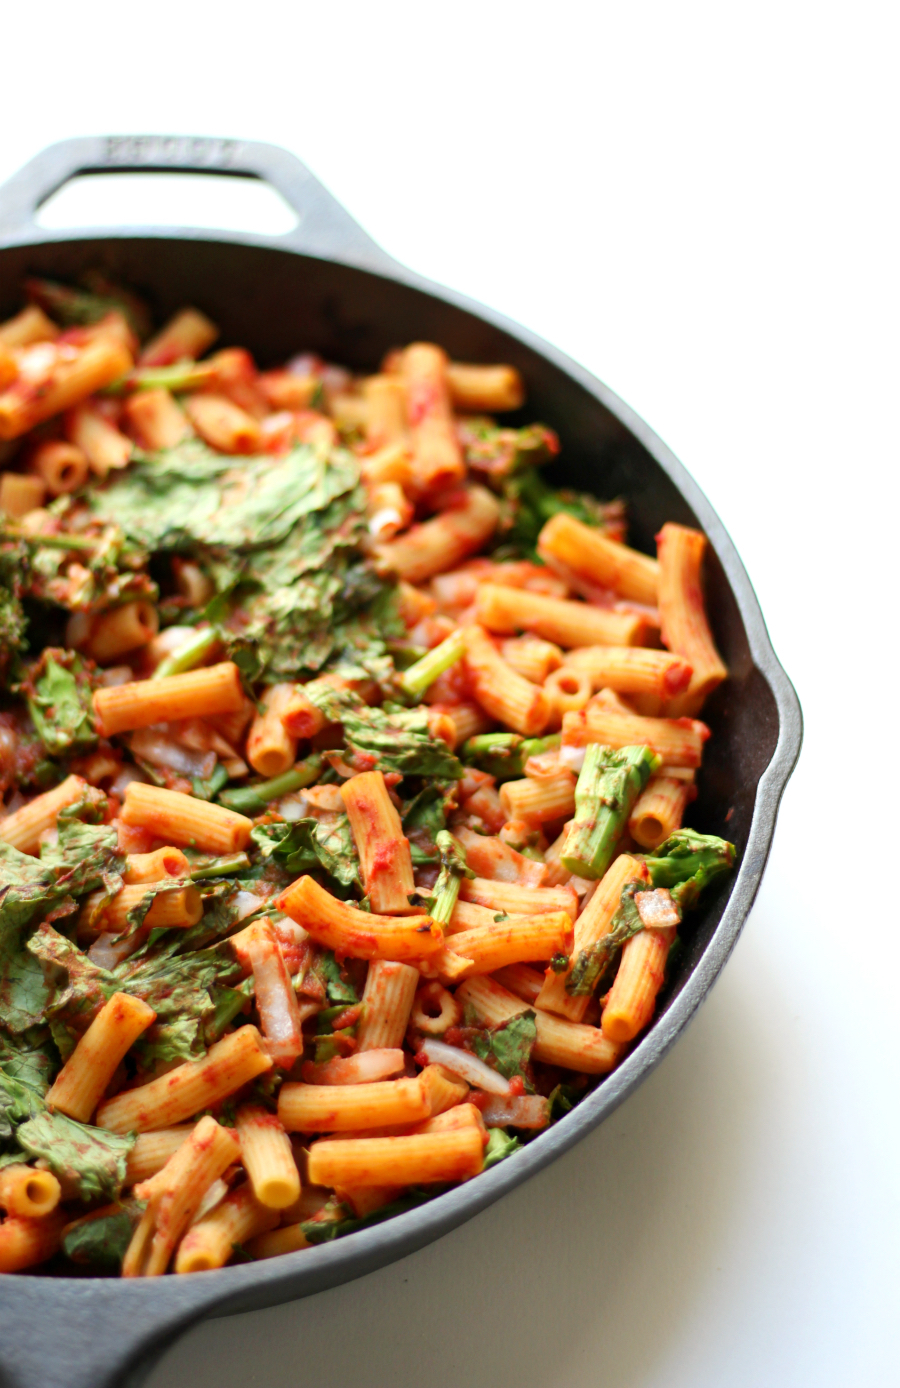 Sweet Tomato & Broccoli Rabe Baked Penne (Gluten-Free, Vegan, Allergy-Free) | Strength and Sunshine @RebeccaGF666 A delicious weeknight pasta dinner recipe the whole family will love! Sweet Tomato & Broccoli Rabe Baked Penne that's gluten-free, vegan, and allergy-free. Packed with flavor and nutritious veggies, this healthy meal will be an easy new favorite!